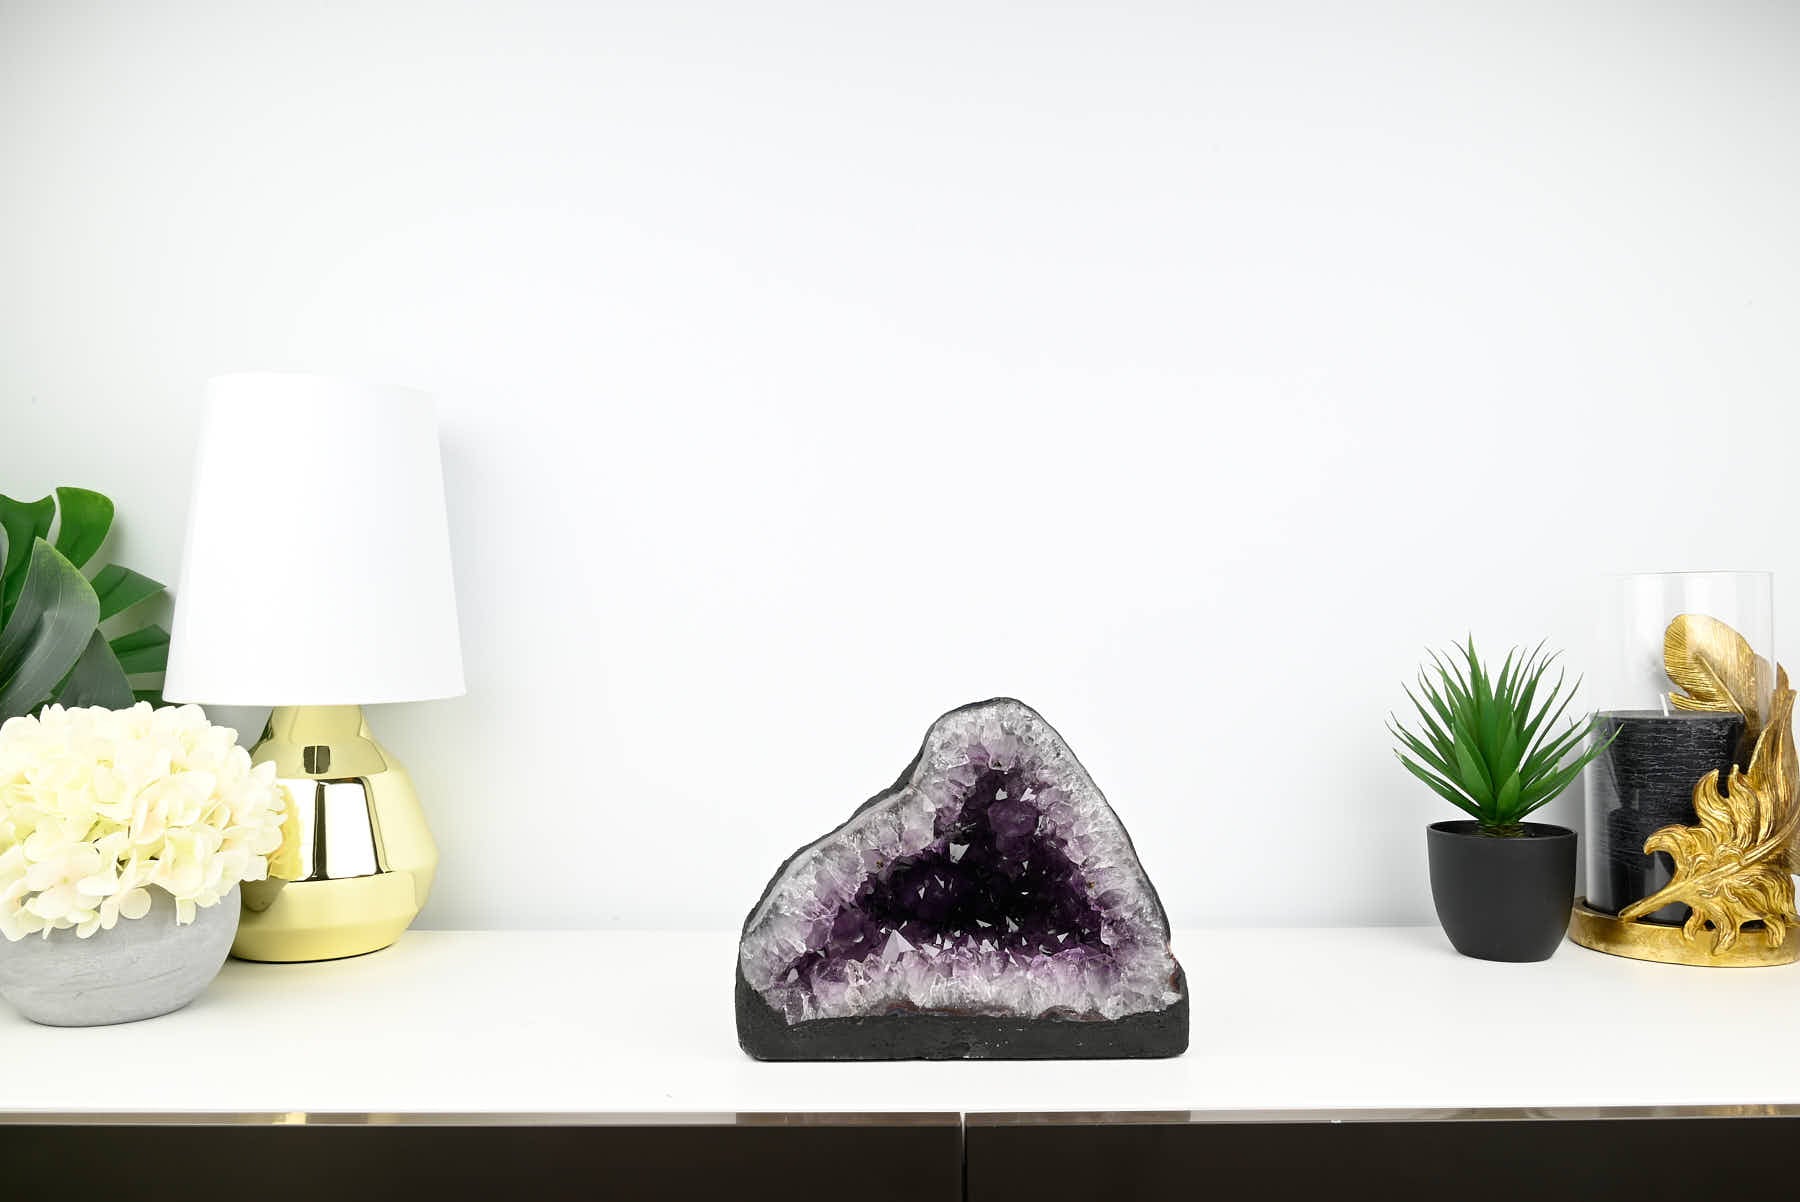 Extra Quality Amethyst Cathedral - 5.48kg, 19cm tall - #CAAMET-10026